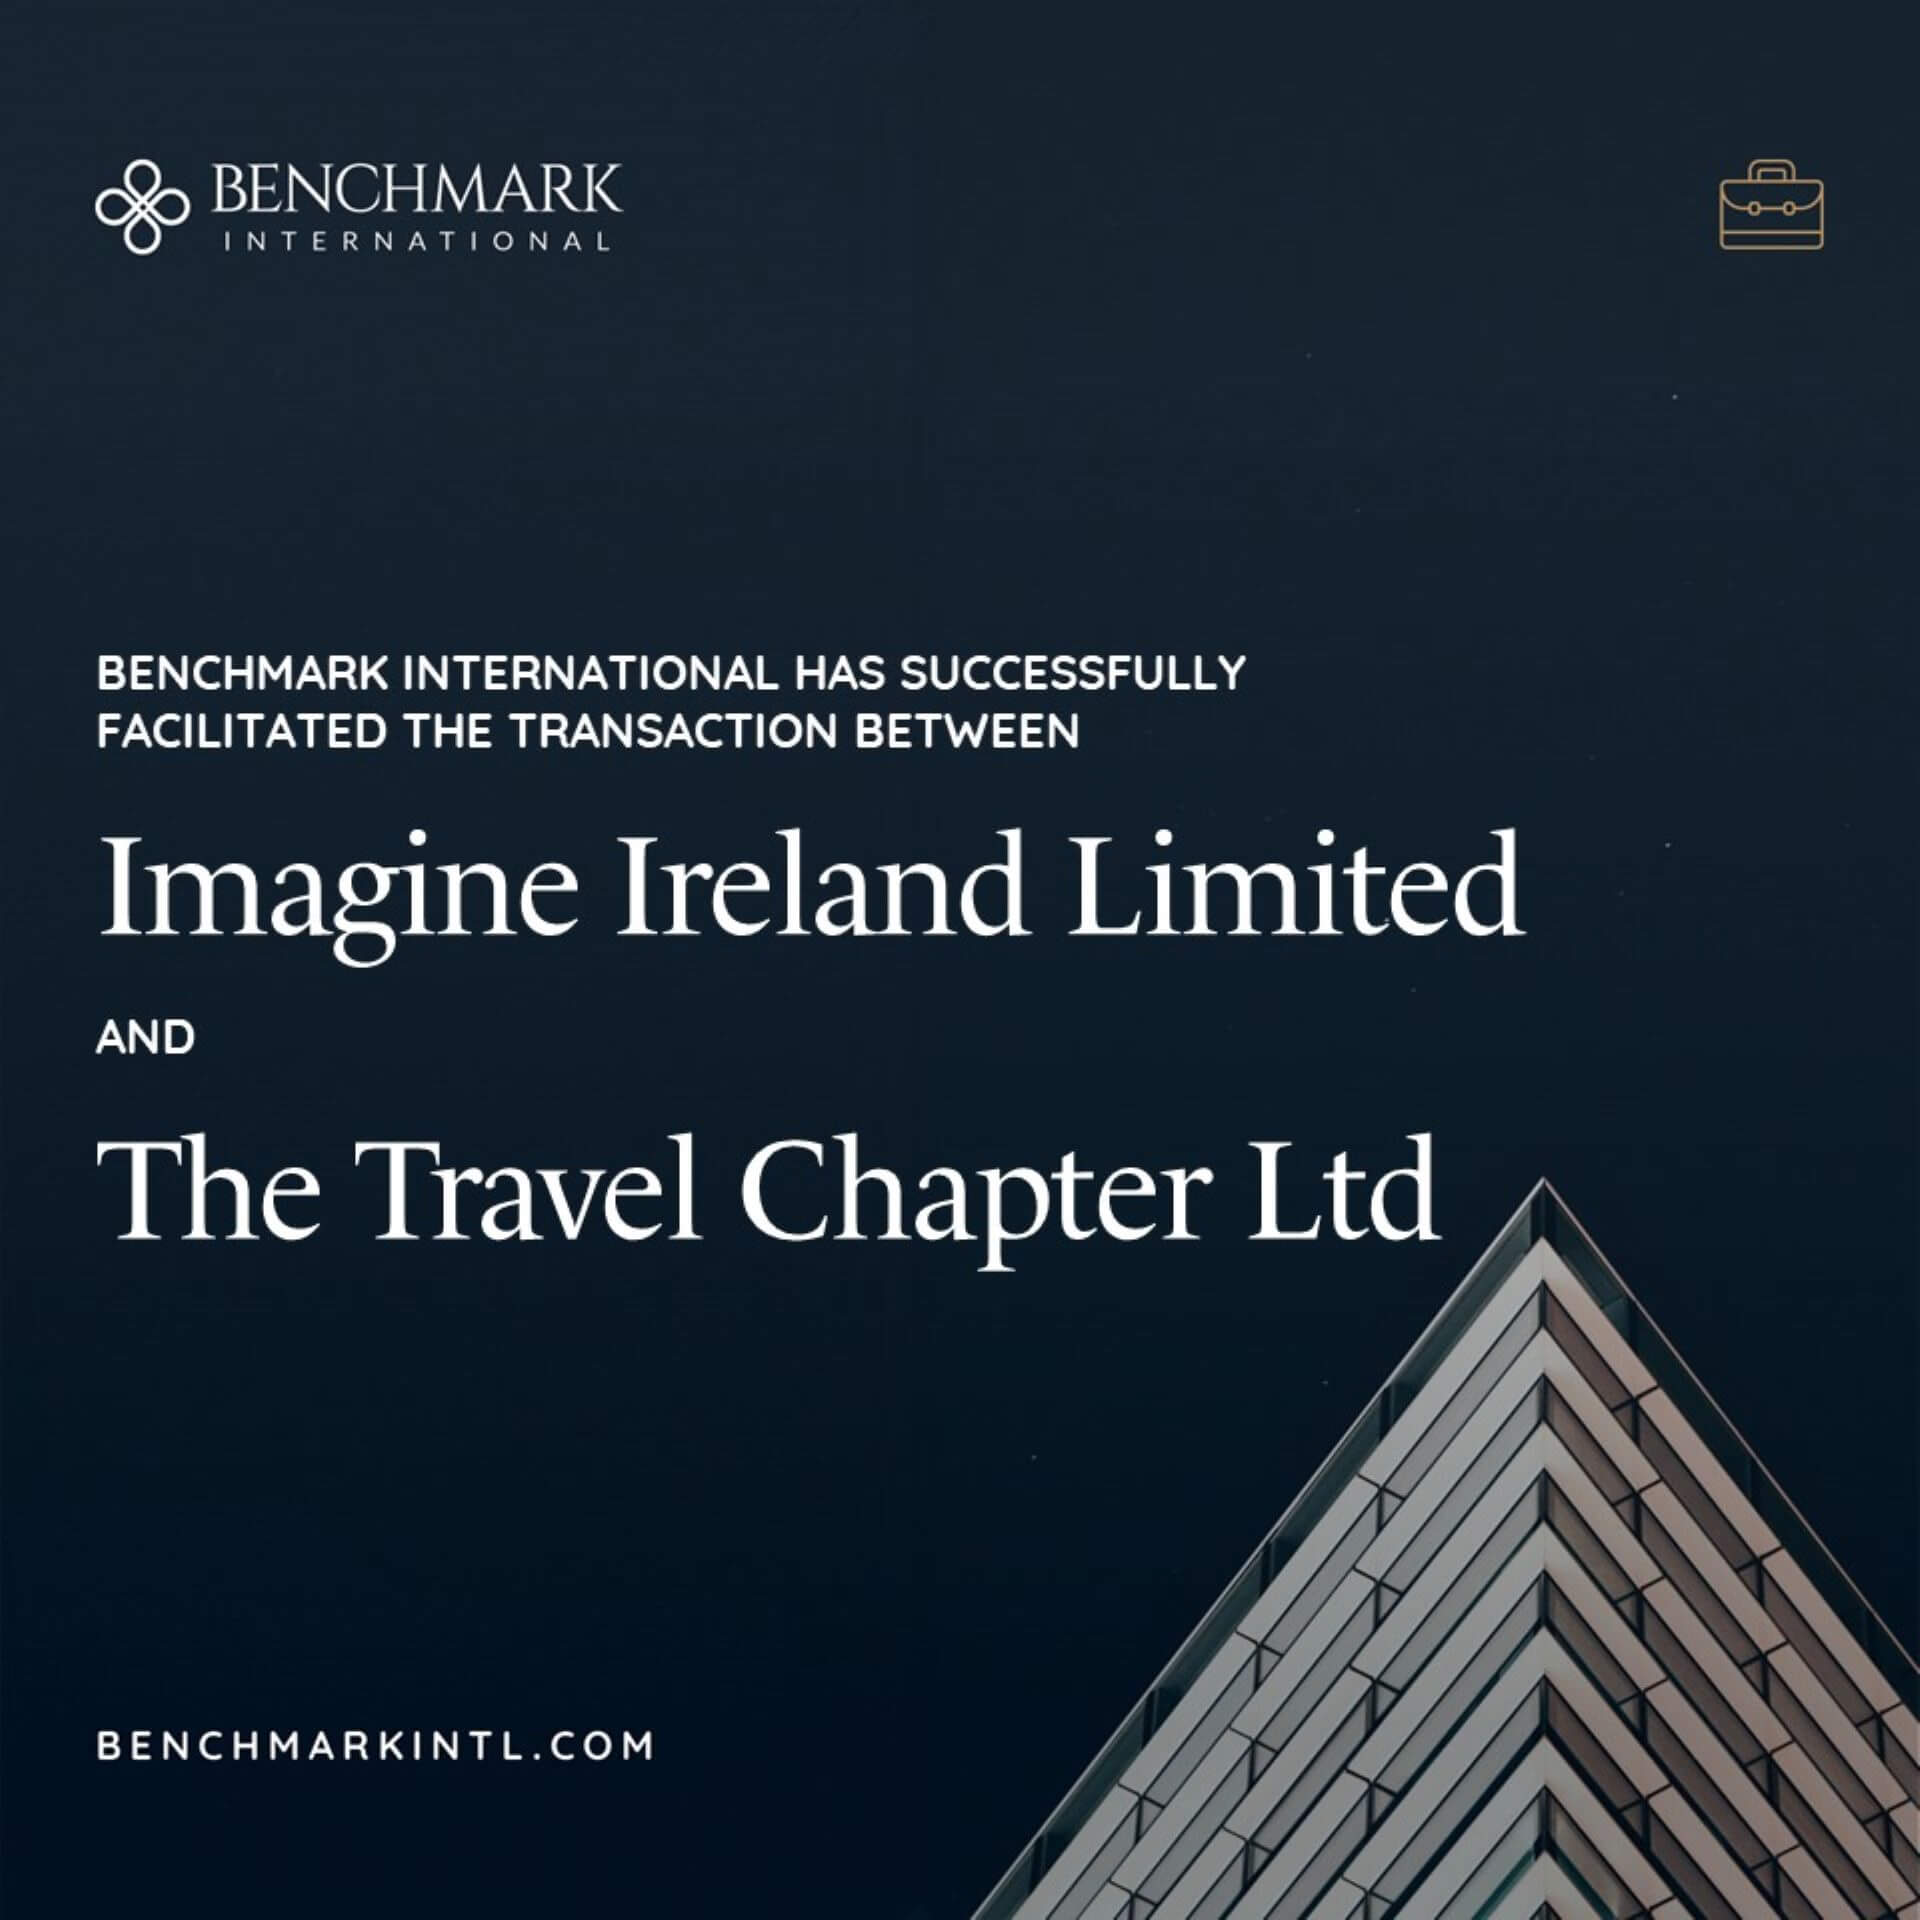 Imagine Ireland acquired by The Travel Chapter